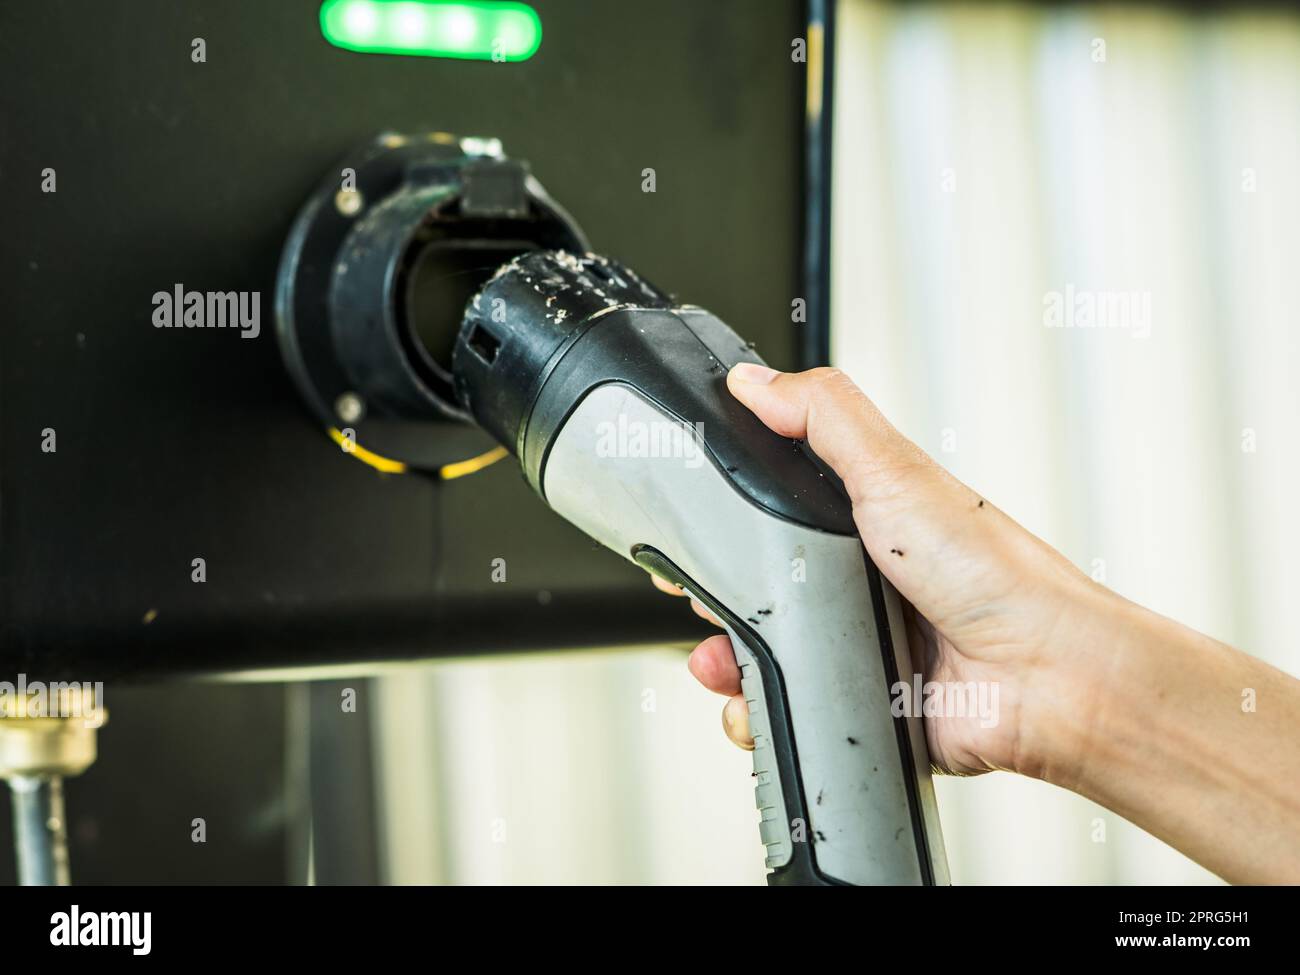 Abandoned electric vehicle charging station. Electric vehicle charging station infrastructure problems. Hand holding EV charger that hasn't been used for a long time until the ants come to nest. Stock Photo